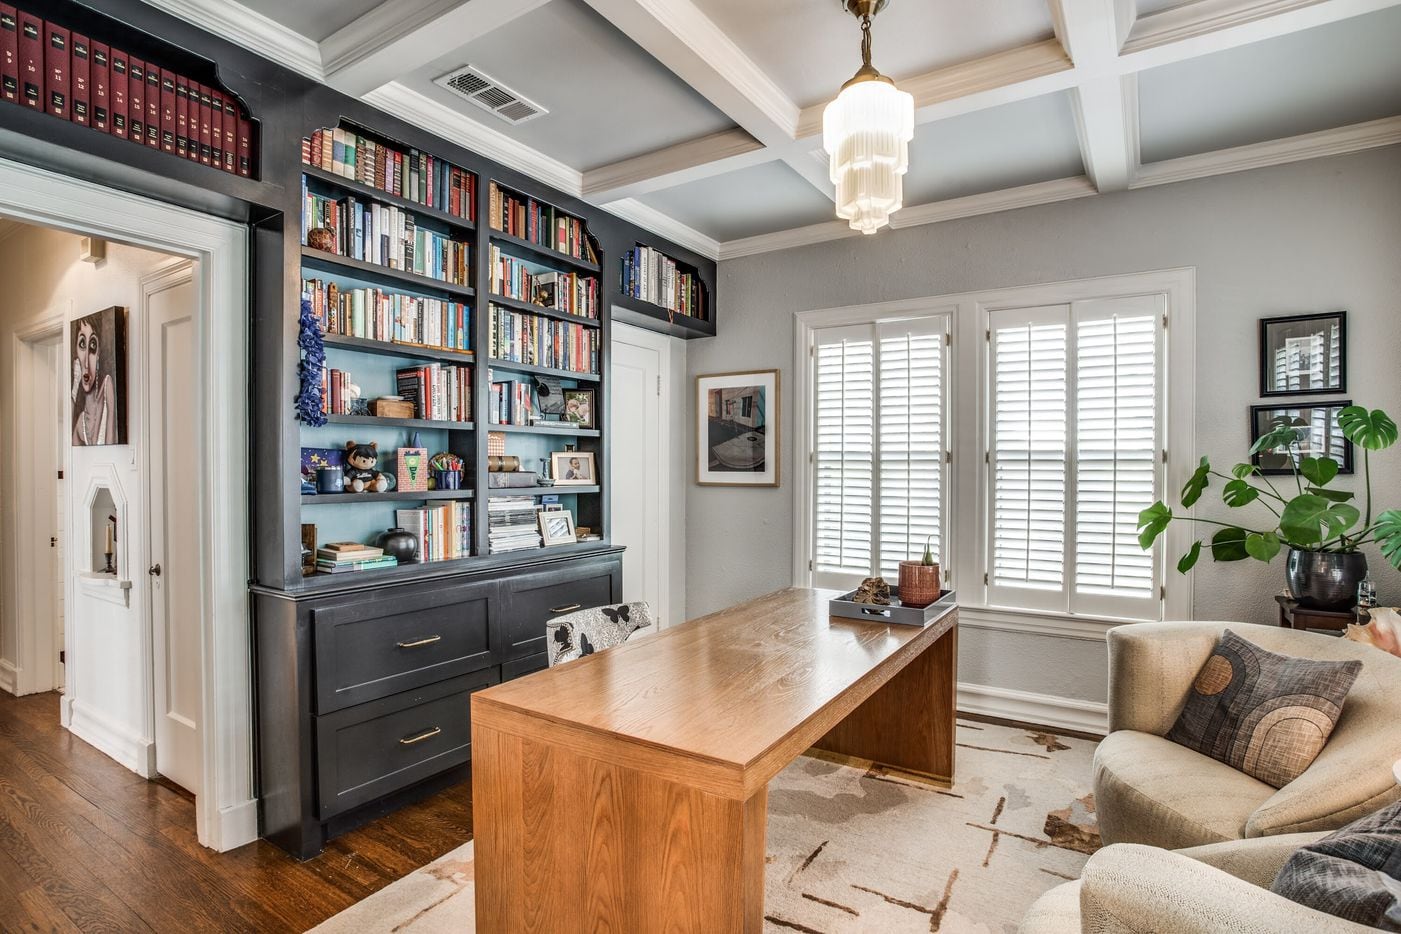 The downstairs study in the home at 6521 Lakeshore Drive in Dallas.